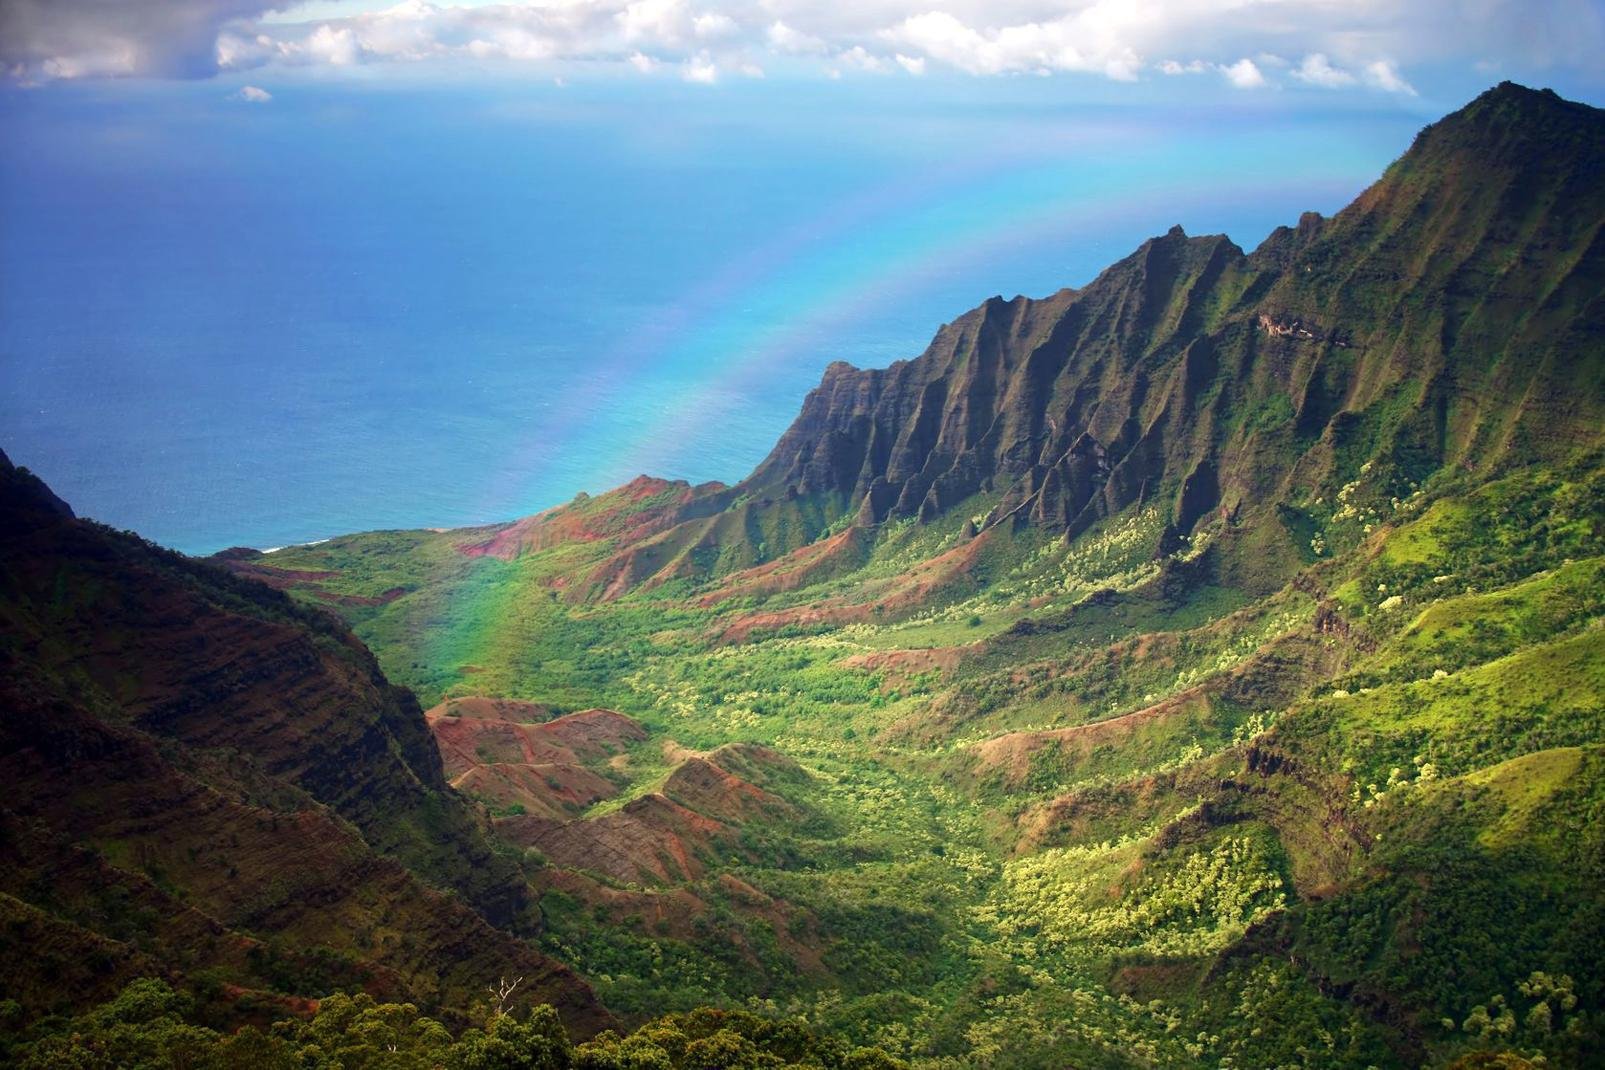 In Princeville, on the northern coast of Kauai Island, enjoy an upscale seaside resort. It hosts the island's most luxurious hotel, two superb golf courses and beaches that are great for swimming, snorkelling and surfing....